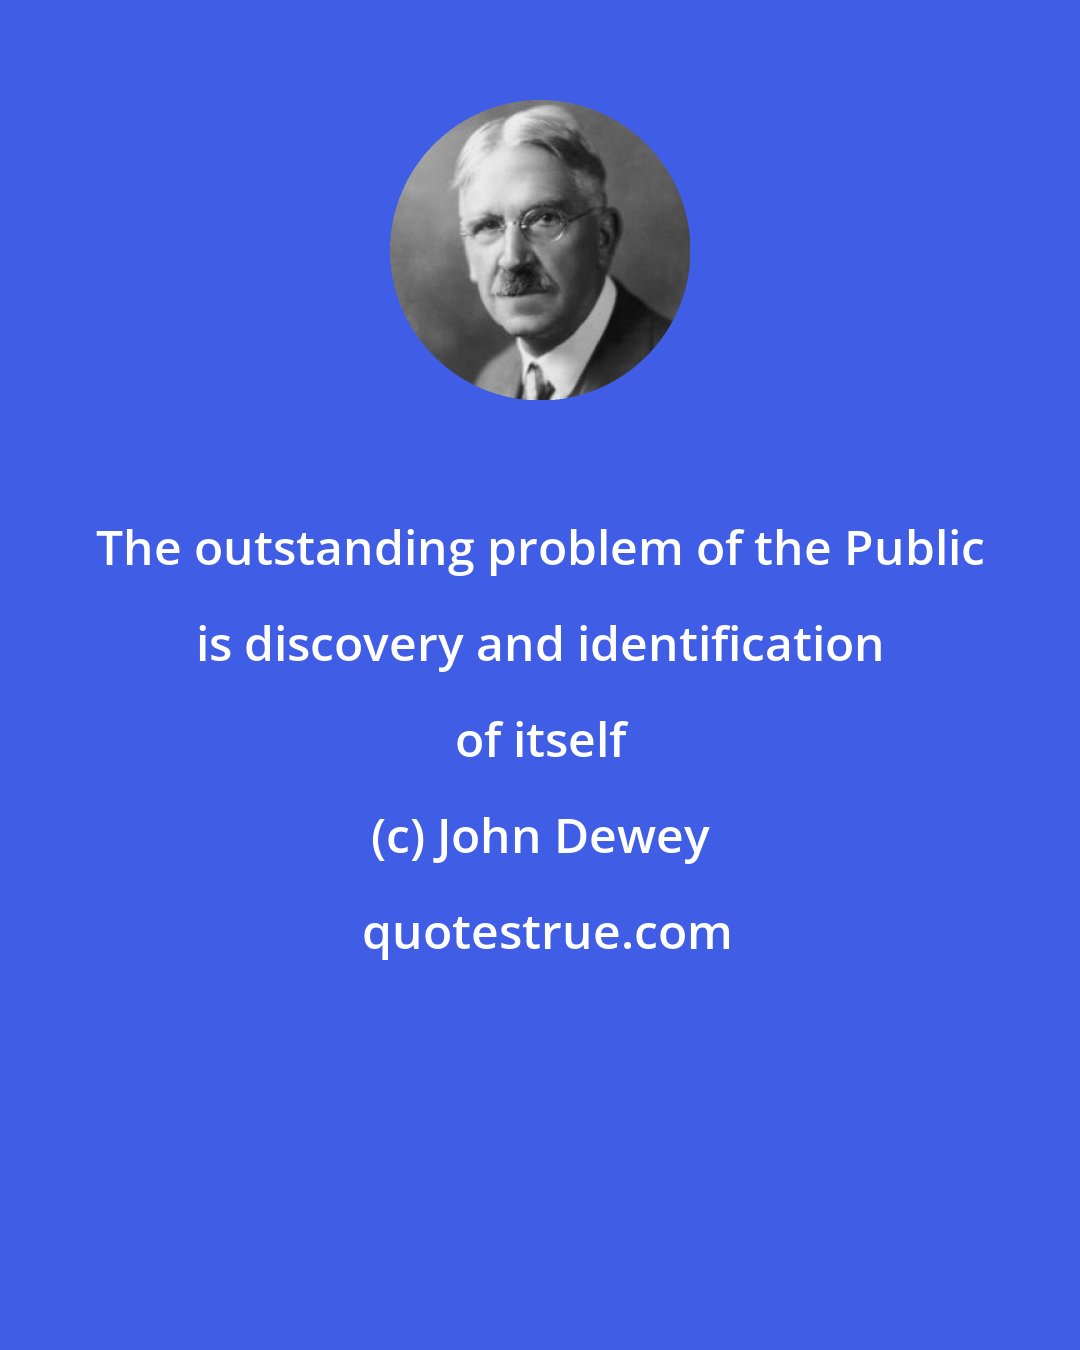 John Dewey: The outstanding problem of the Public is discovery and identification of itself